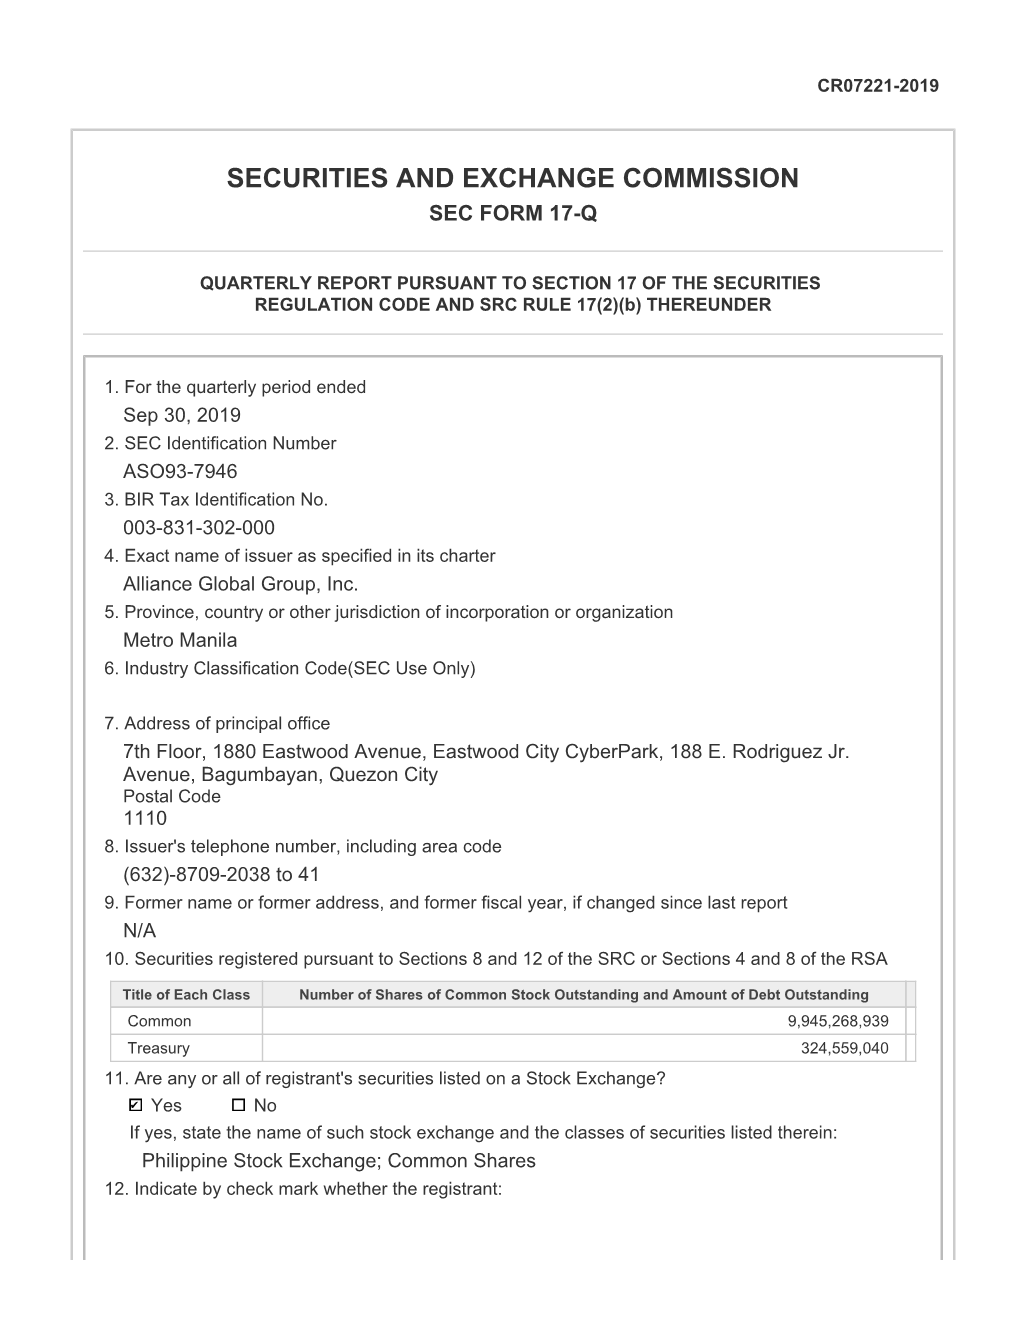 Securities and Exchange Commission Sec Form 17-Q